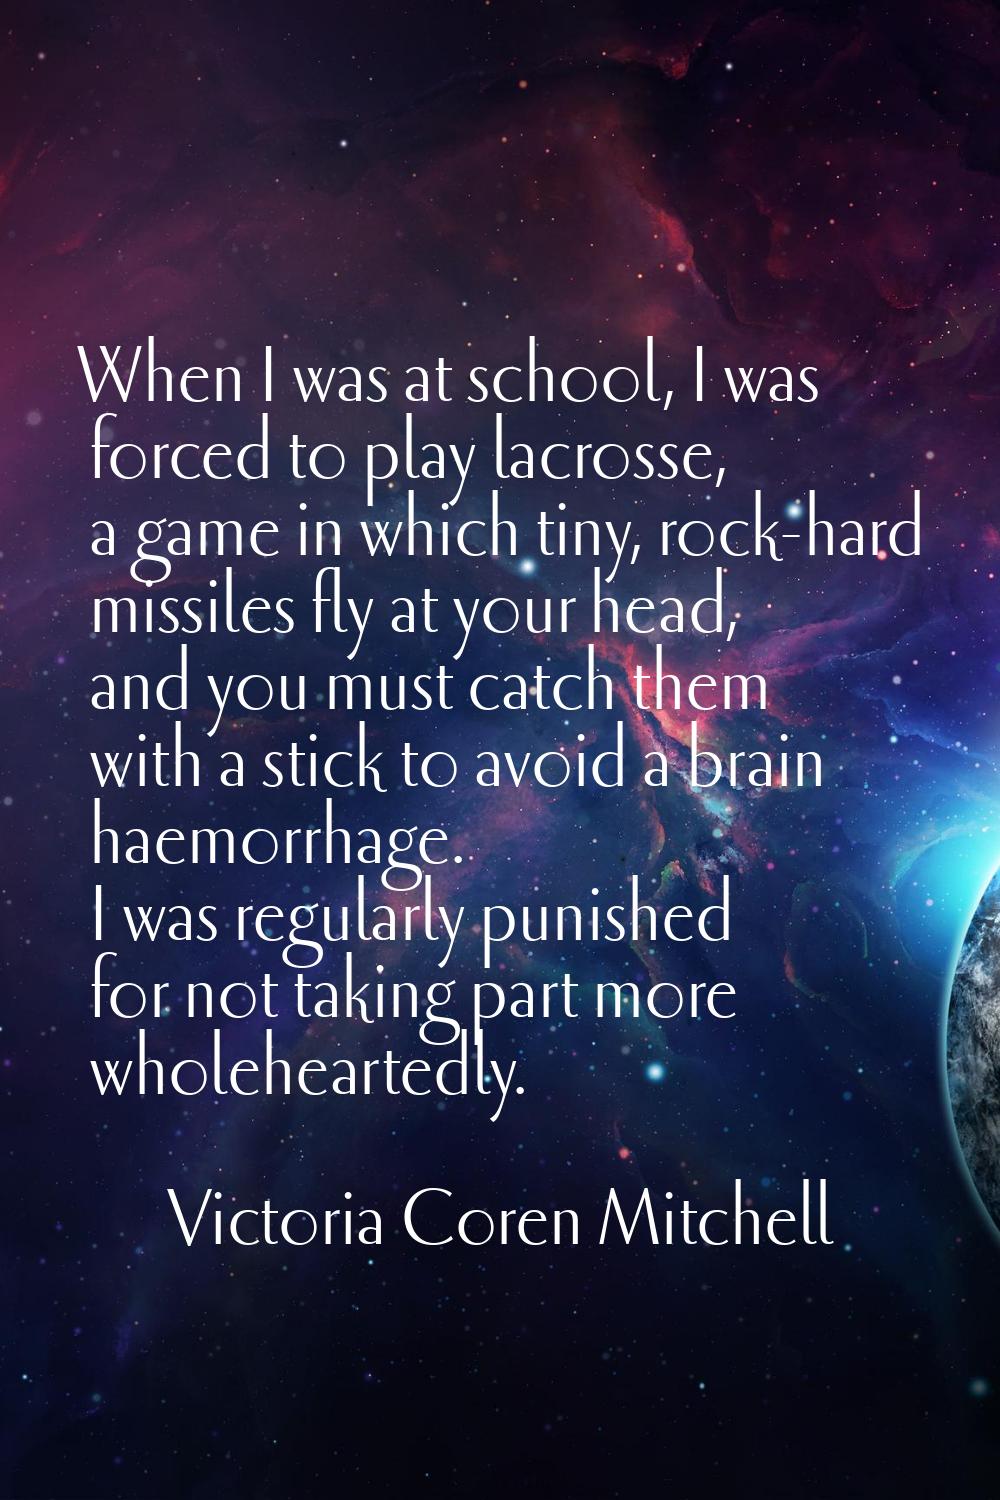 When I was at school, I was forced to play lacrosse, a game in which tiny, rock-hard missiles fly a